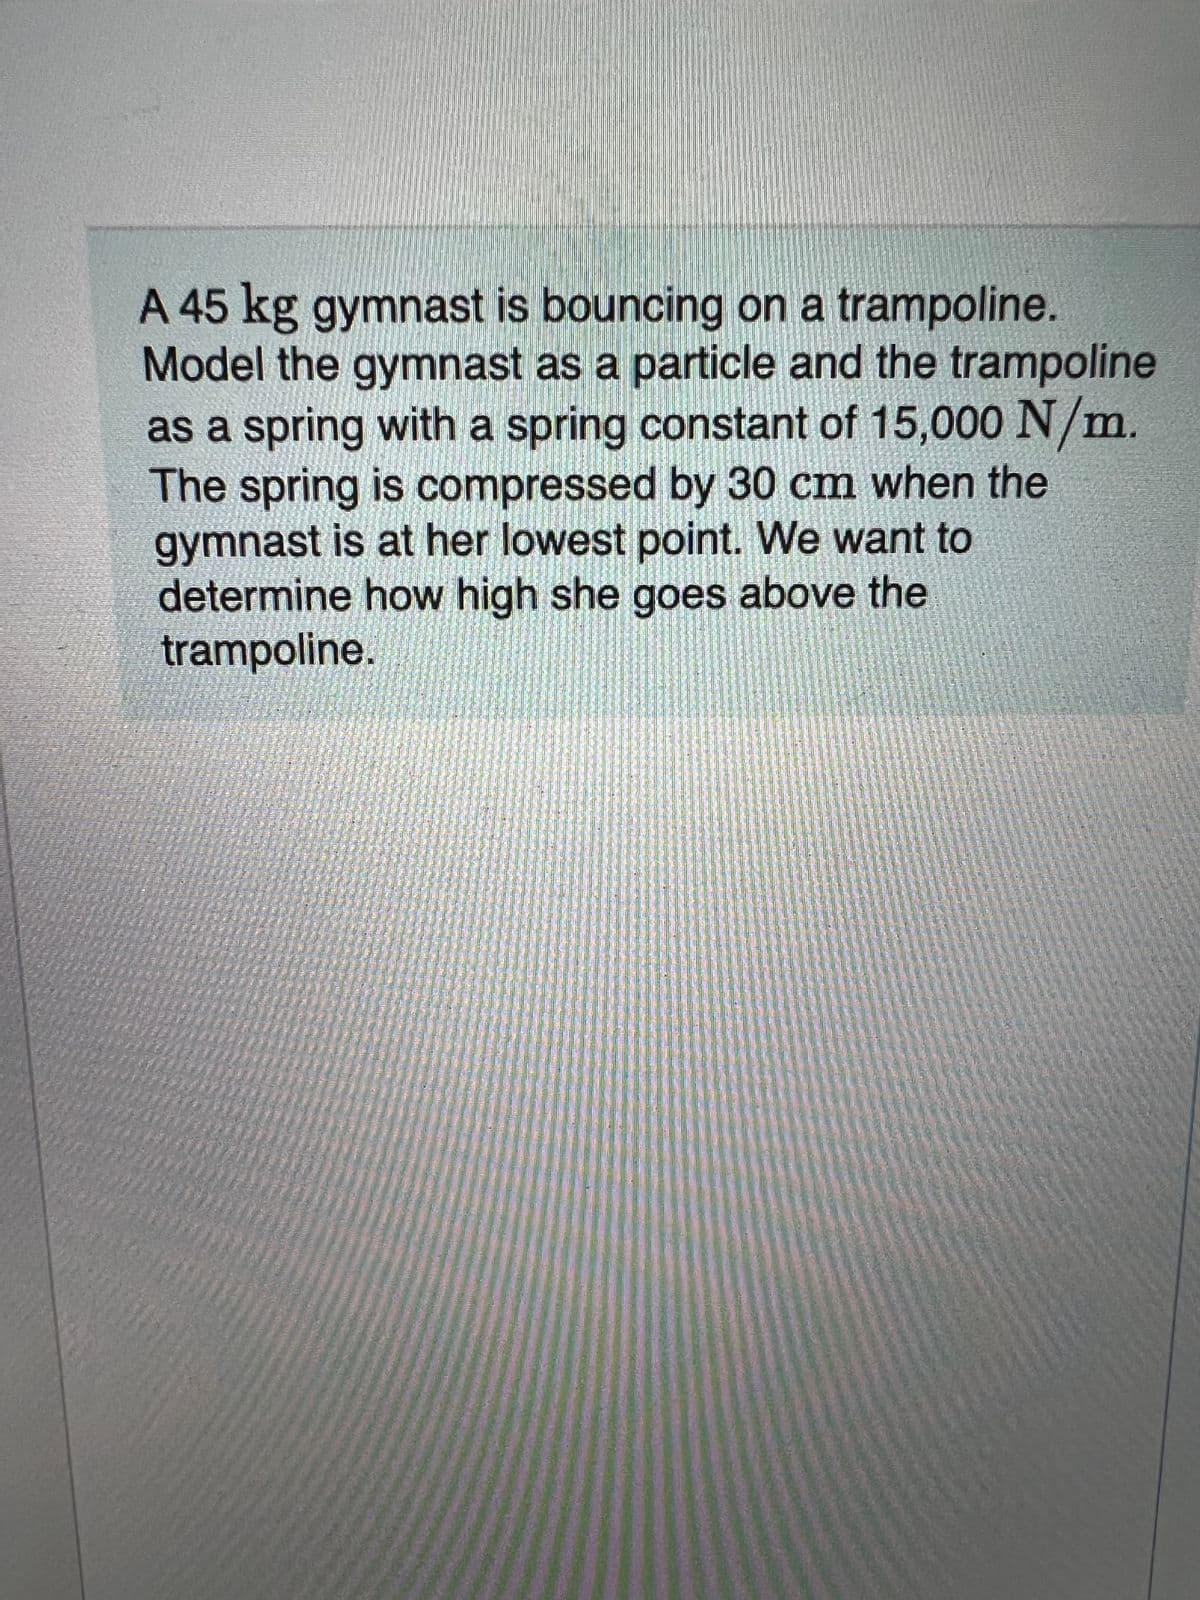 A 45 kg gymnast is bouncing on a trampoline.
Model the gymnast as a particle and the trampoline
as a spring with a spring constant of 15,000 N/m.
The spring is compressed by 30 cm when the
gymnast is at her lowest point. We want to
determine how high she goes above the
trampoline.
